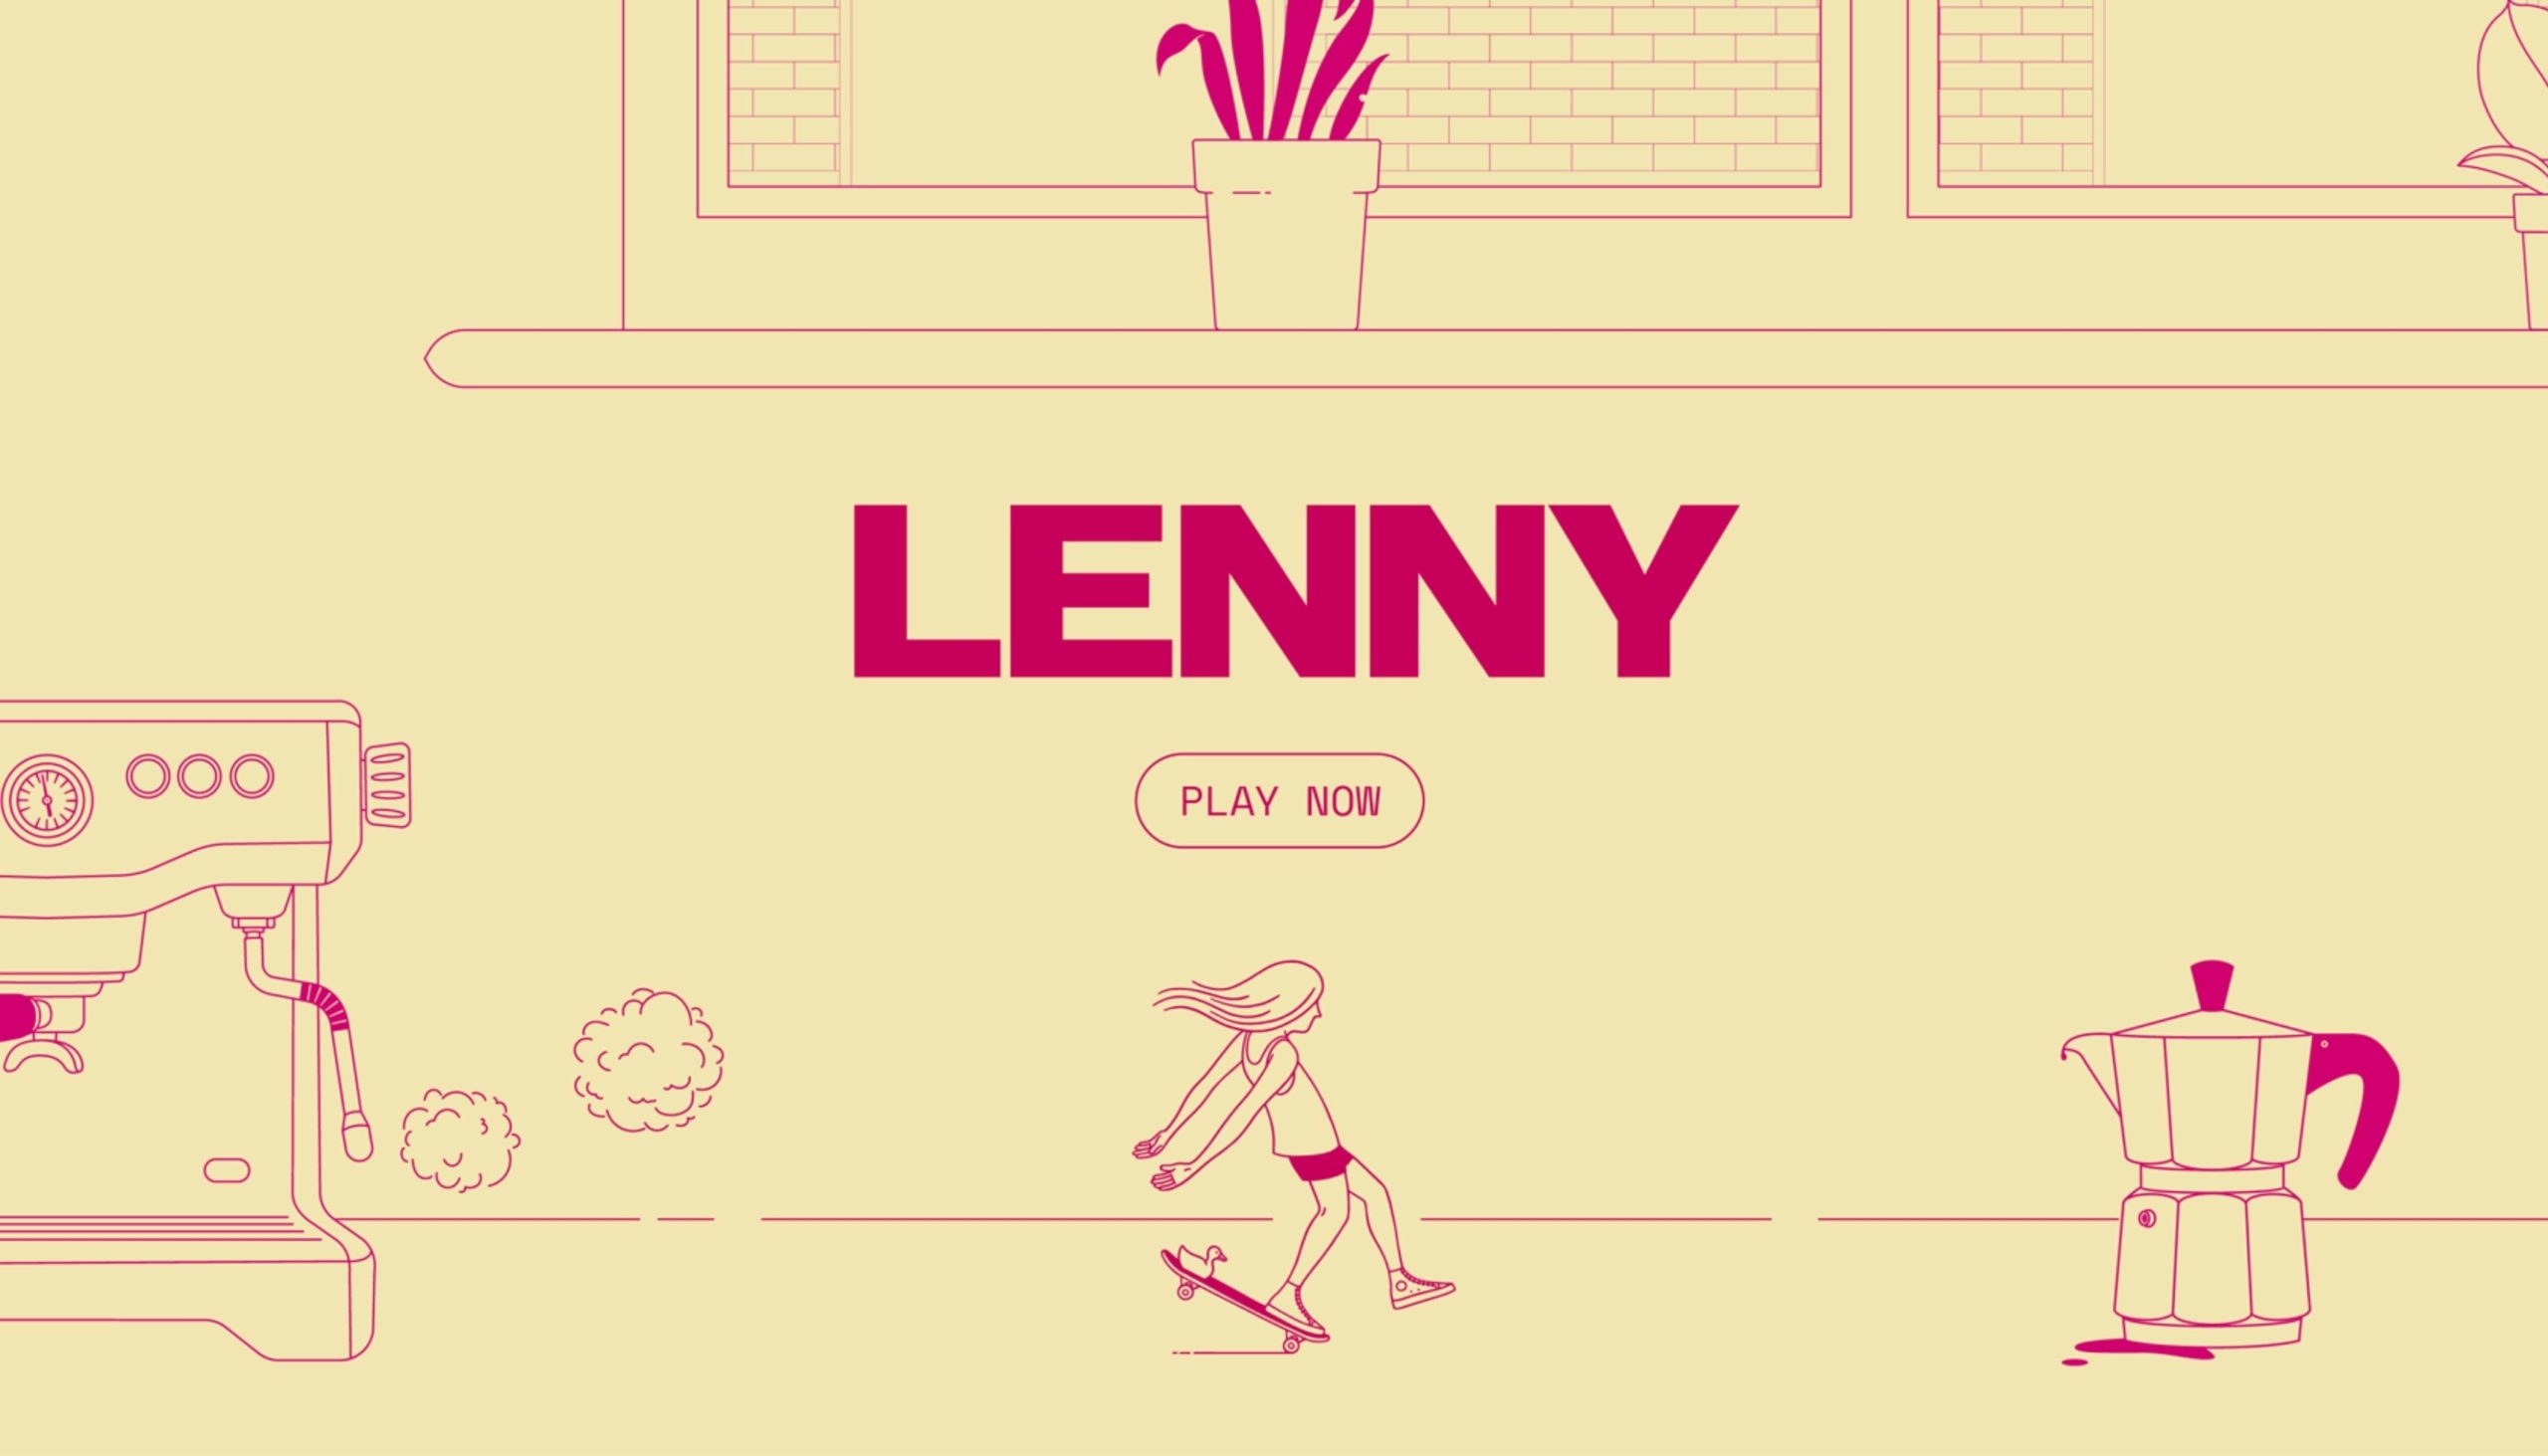 Fancy a Minor Distraction?  Go skateboarding with Lenny from Minor Figures